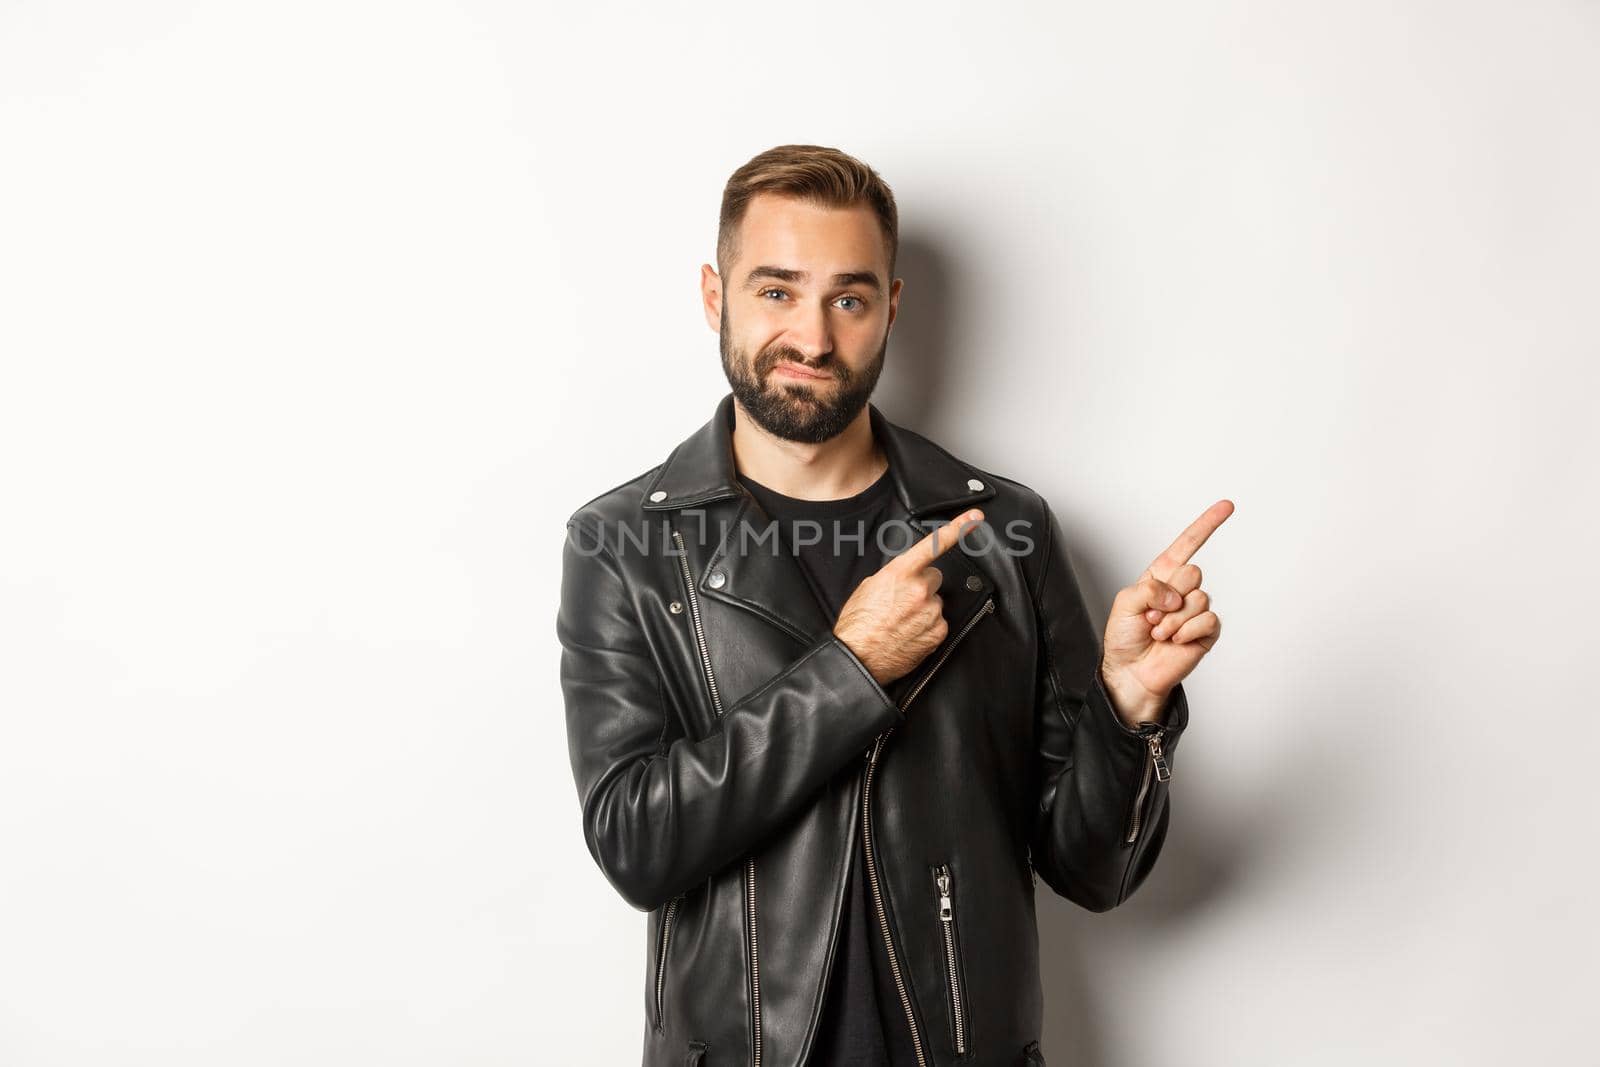 Skeptical and doubtful guy in black leather jacket, shrugging while pointing at upper right corner promo offer, standing over white background.